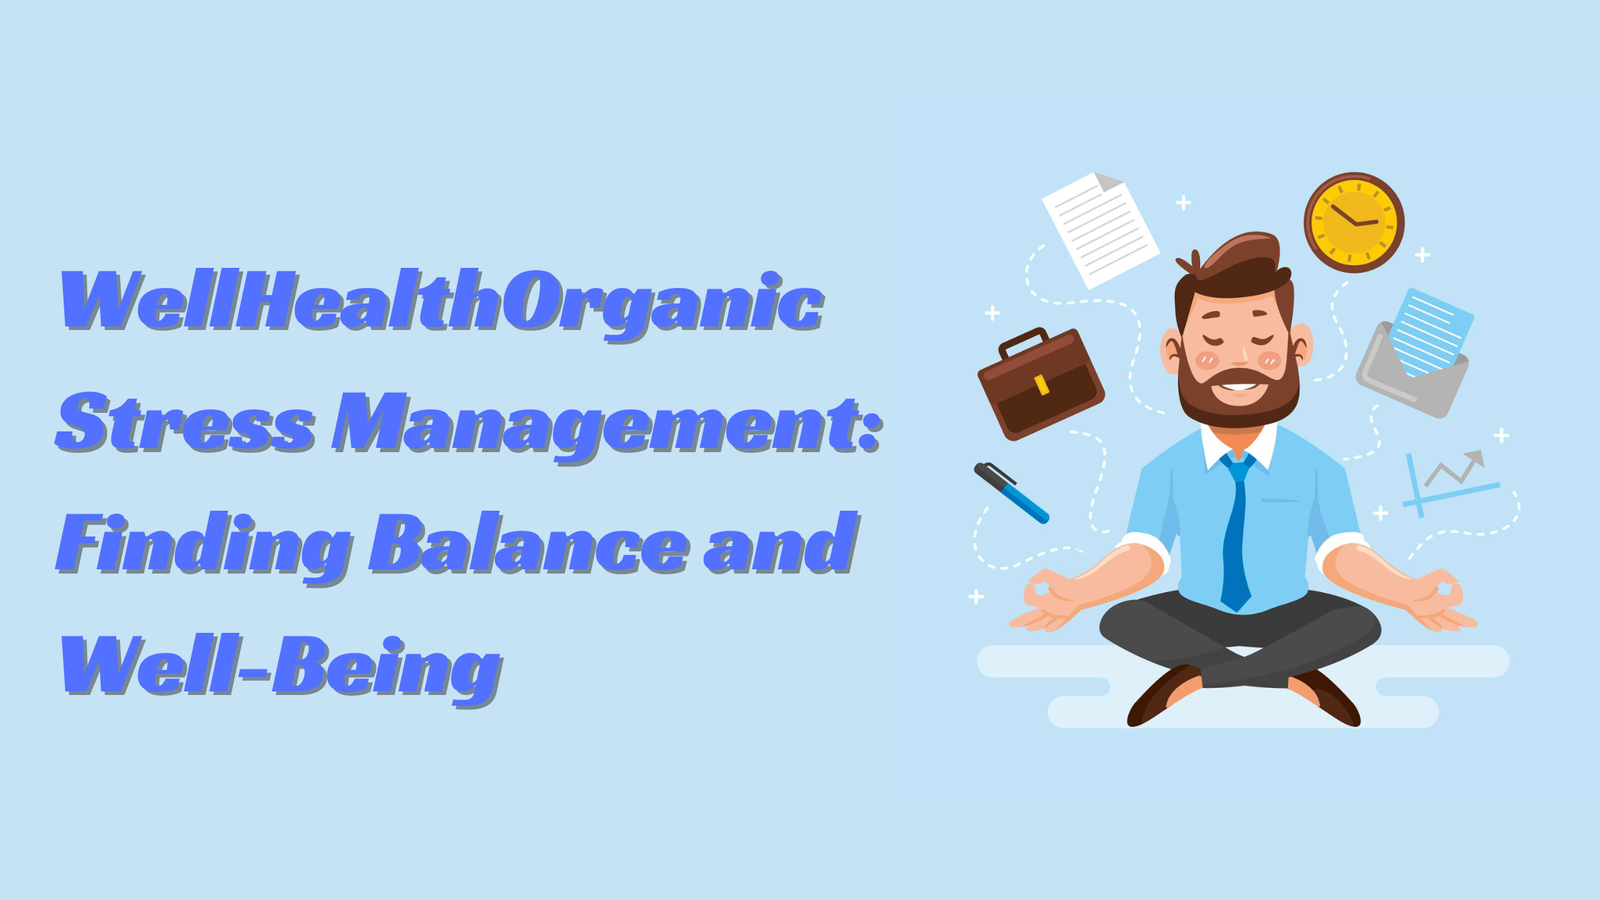 WellHealthOrganic Stress Management: Finding Balance and Well-Being